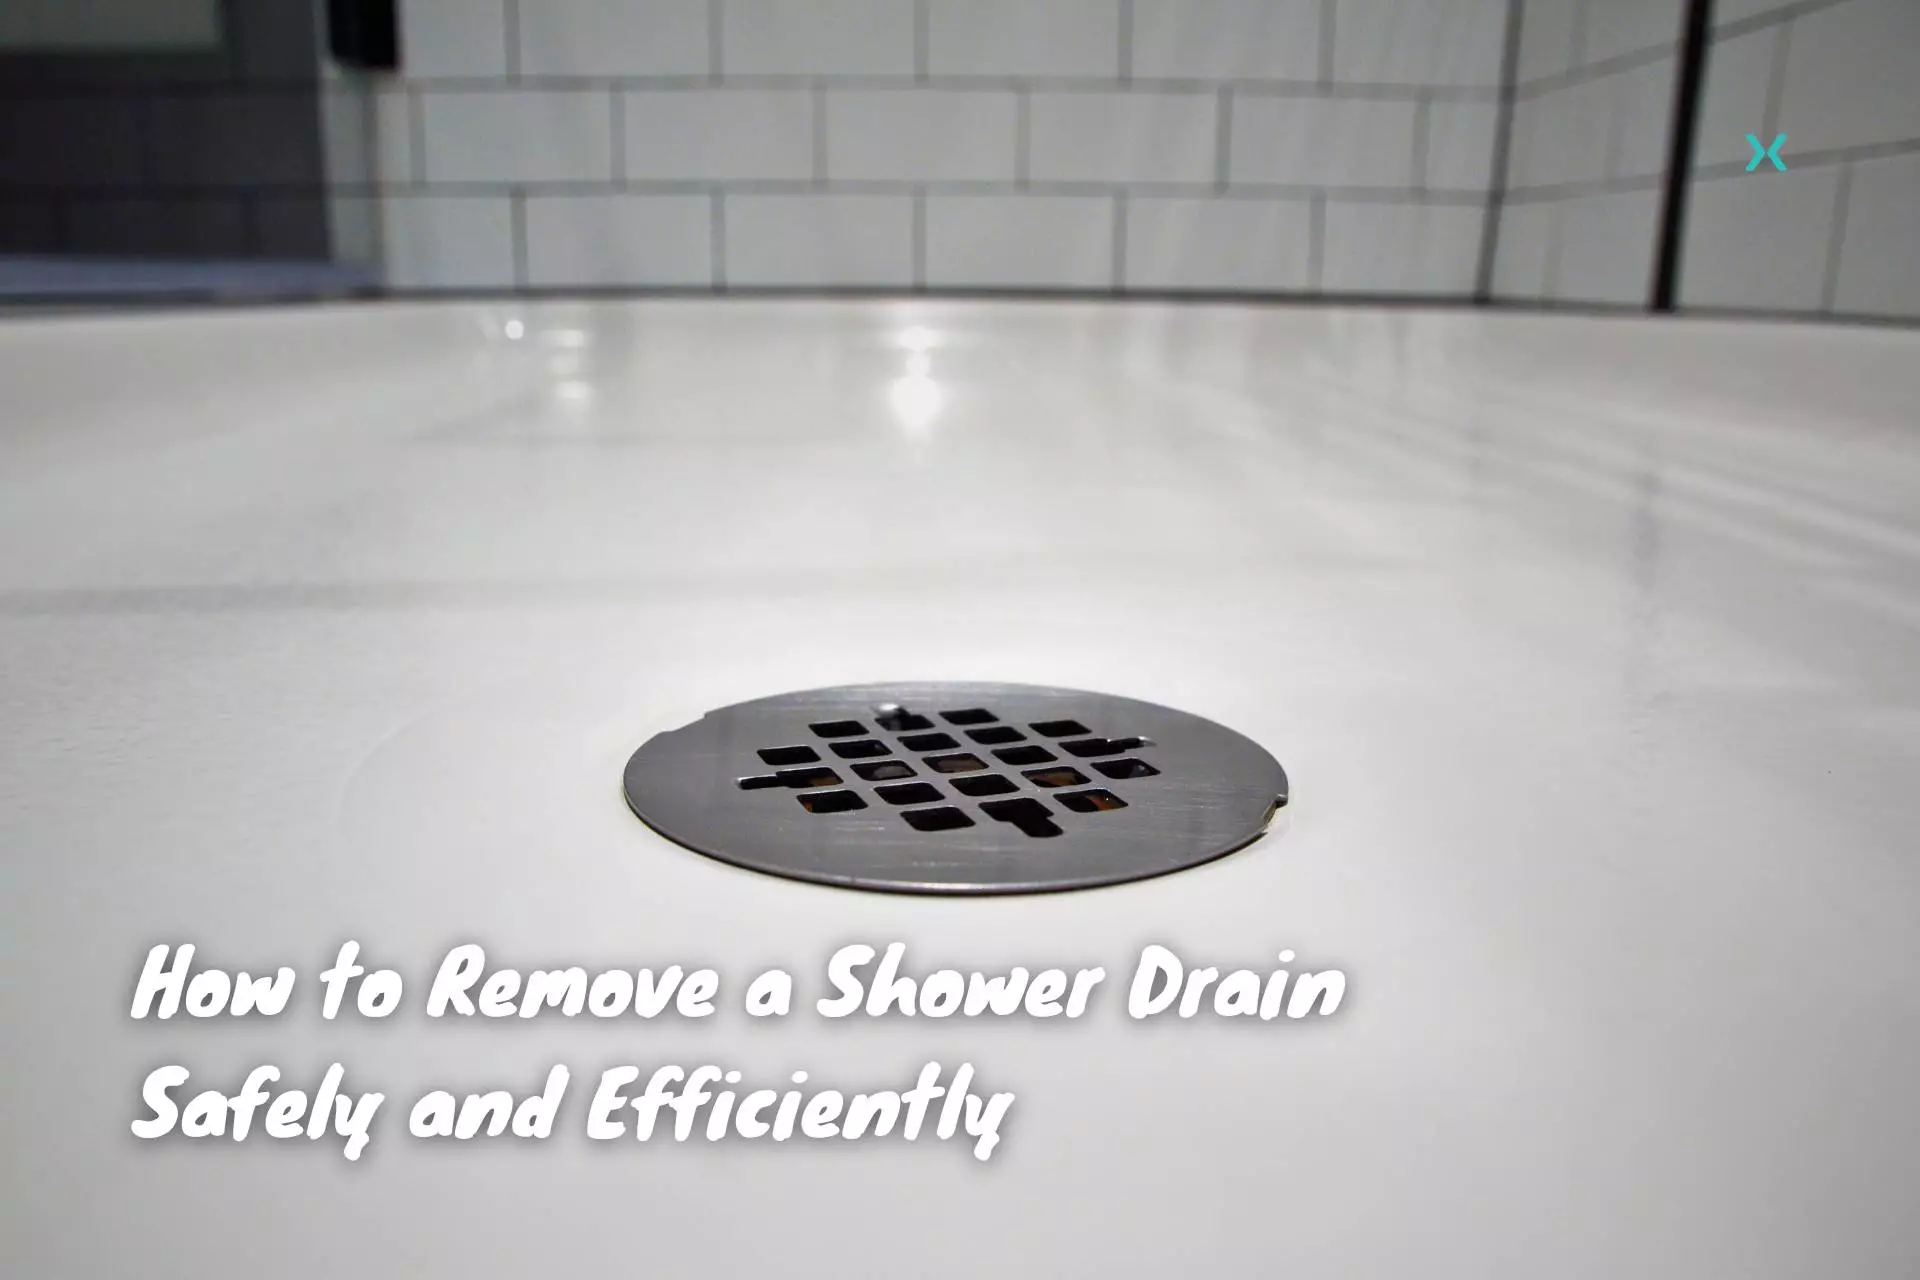 https://phyxter.ai/wp-content/uploads/2024/01/How-to-Remove-Shower-Drain-Safely-and-Efficiently.webp